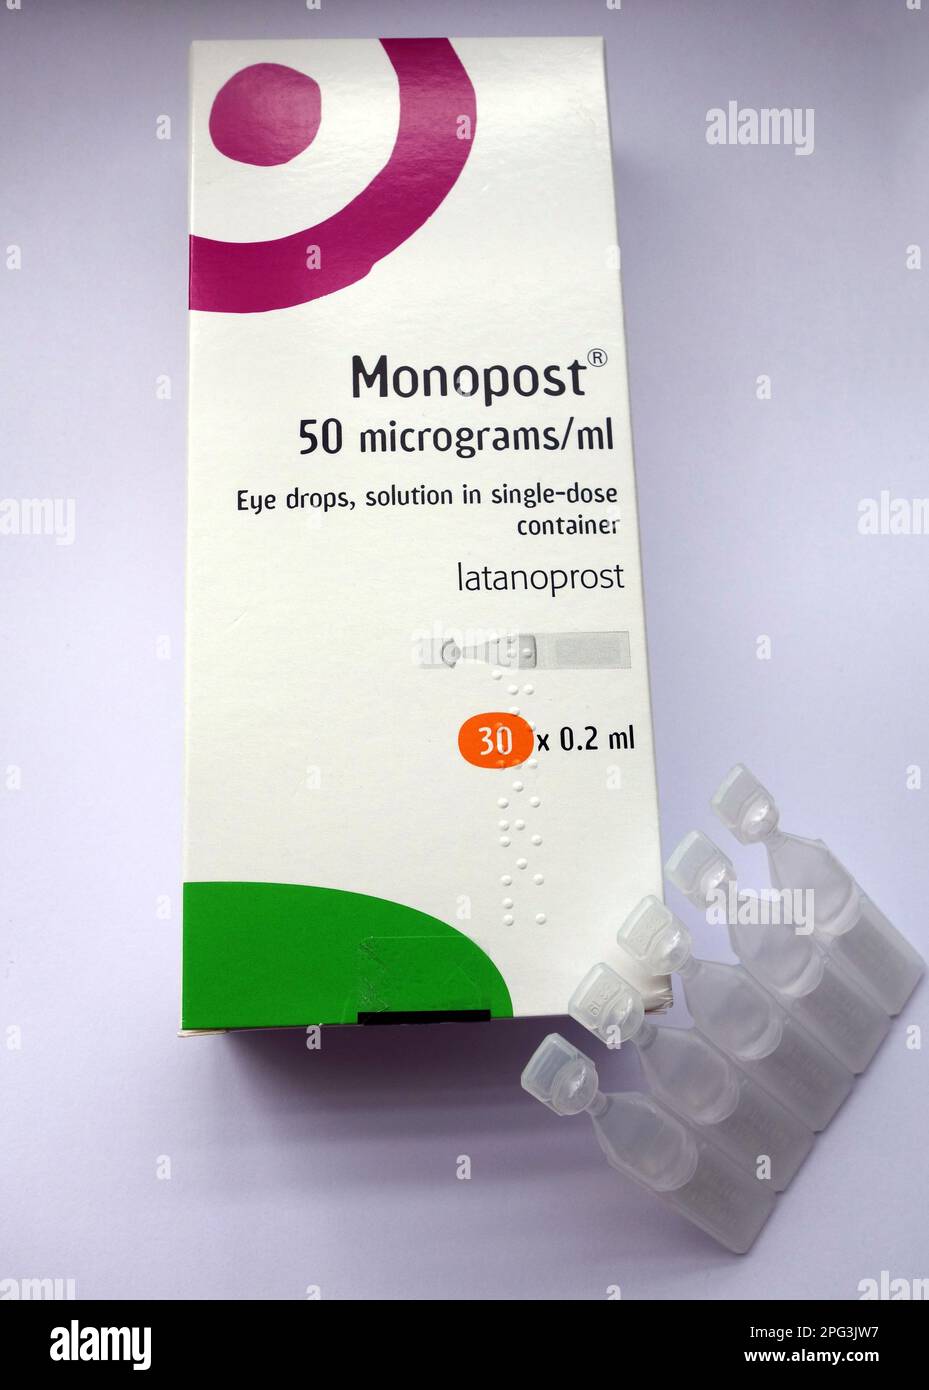 A Box of Monopost (Latanoprost) 50 mcg/ml Eye Drop Solution in single-dose Containers by Thea to Treat Open Angle Glaucoma and Ocular Hypertension. Stock Photo